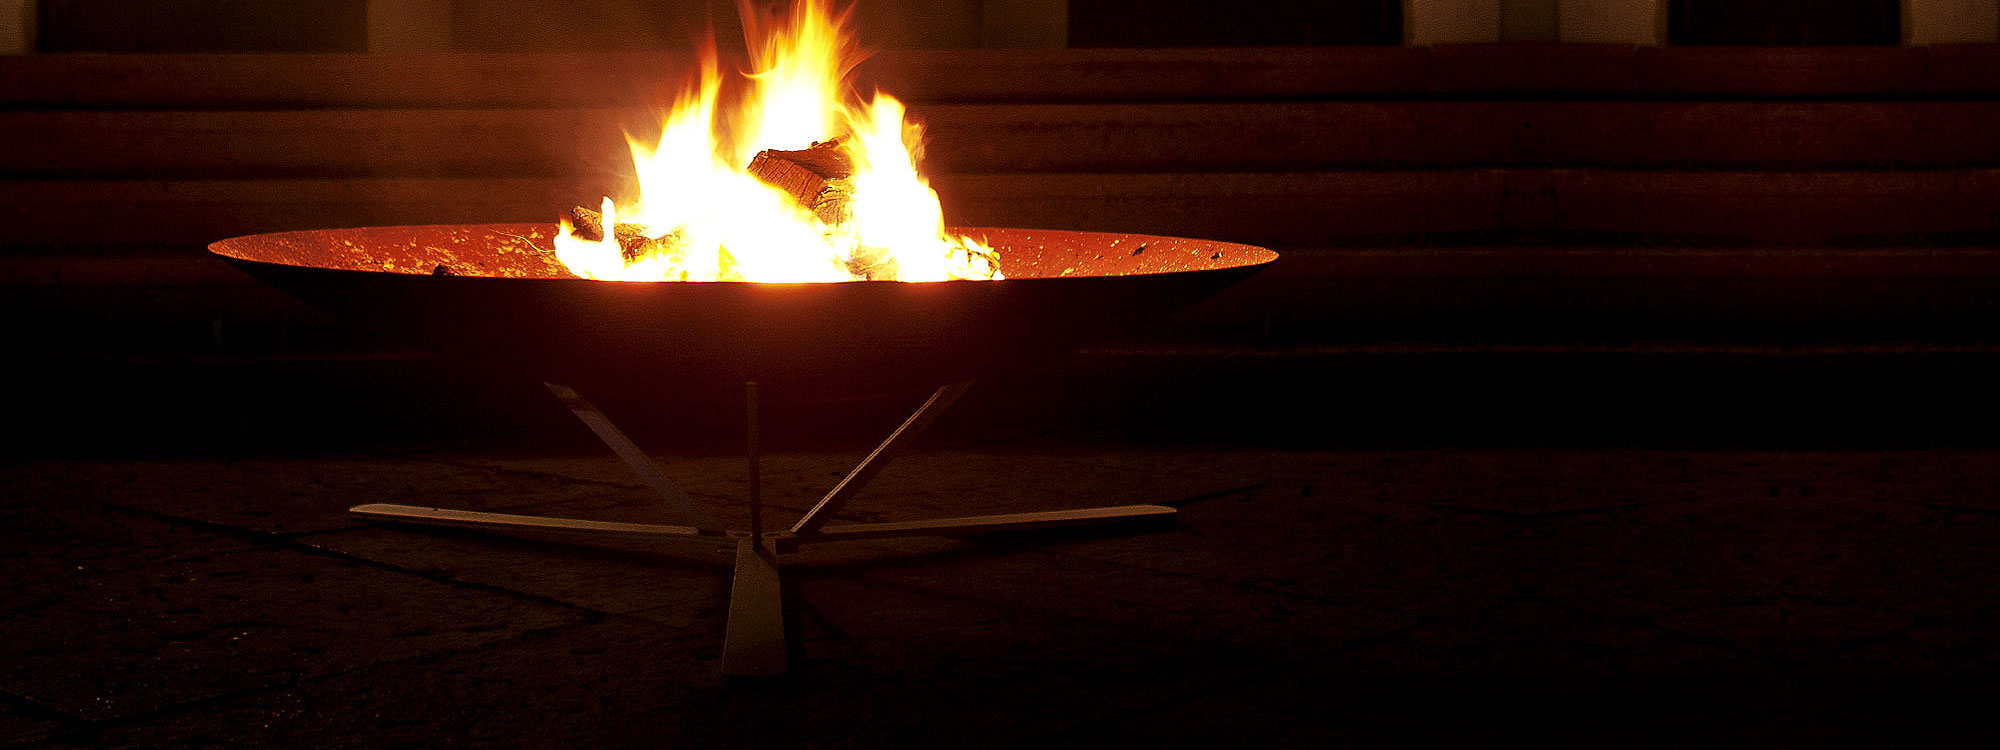 Slow exposure Image of flames within Discolo fire bowl stood on galvanized steel tripod by AK47 Design